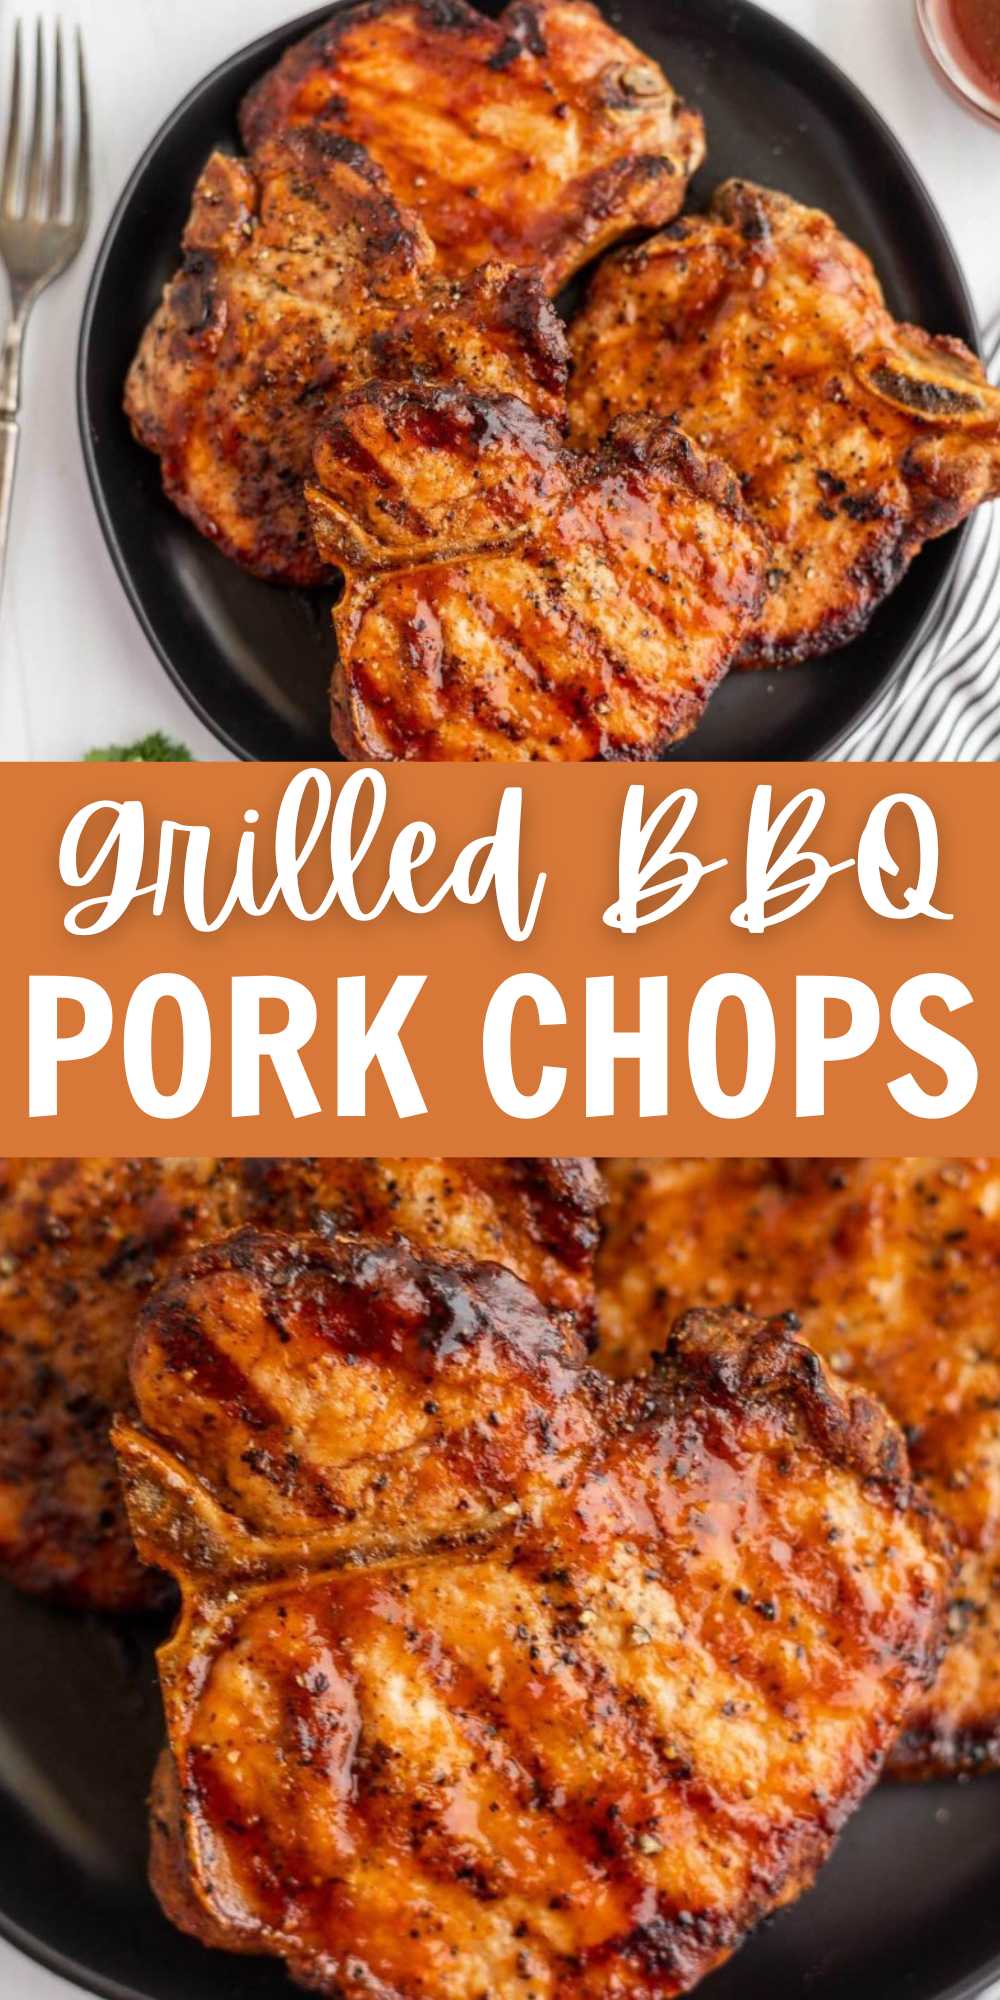 Grilled BBQ Pork Chops have the best flavor, and each bite is so tender. This recipe goes from grill to table in 15 minutes. Pork Chops on the grill make such an easy dinner idea and the flavor can't be beat. The barbecue sauce combined with the grill flavor makes for the best meal.  #eatingonadime #grilledbbqporkchops #bbqporkchops #grilledporkchops